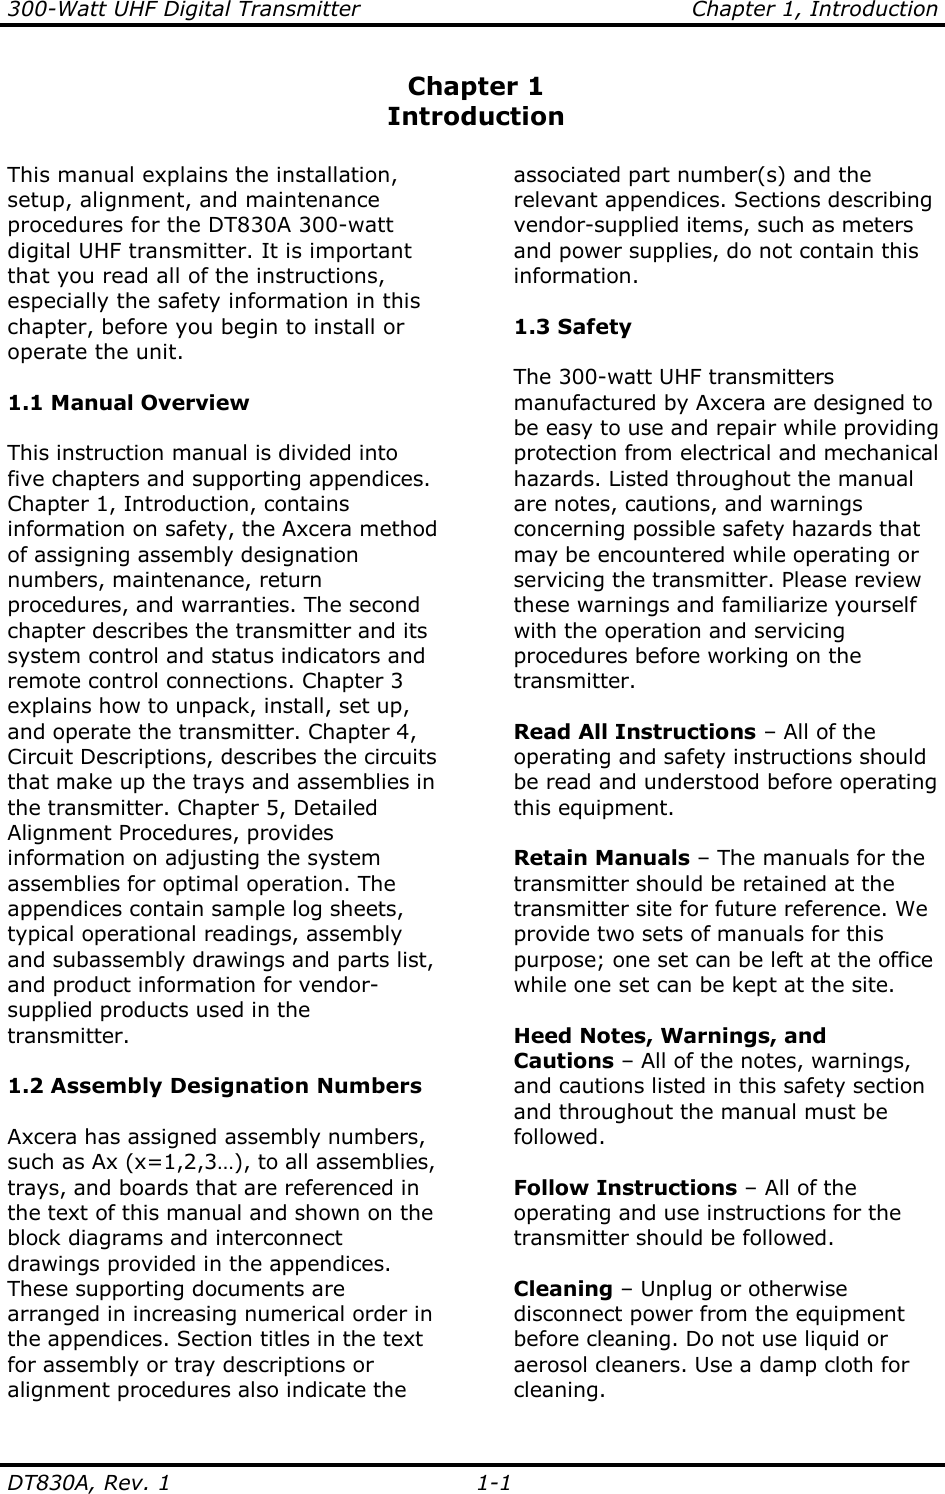 300-Watt UHF Digital Transmitter                                  Chapter 1, Introduction DT830A, Rev. 1    1-1 Chapter 1 Introduction  This manual explains the installation, setup, alignment, and maintenance procedures for the DT830A 300-watt digital UHF transmitter. It is important that you read all of the instructions, especially the safety information in this chapter, before you begin to install or operate the unit.  1.1 Manual Overview  This instruction manual is divided into five chapters and supporting appendices. Chapter 1, Introduction, contains information on safety, the Axcera method of assigning assembly designation numbers, maintenance, return procedures, and warranties. The second chapter describes the transmitter and its system control and status indicators and remote control connections. Chapter 3 explains how to unpack, install, set up, and operate the transmitter. Chapter 4, Circuit Descriptions, describes the circuits that make up the trays and assemblies in the transmitter. Chapter 5, Detailed Alignment Procedures, provides information on adjusting the system assemblies for optimal operation. The appendices contain sample log sheets, typical operational readings, assembly and subassembly drawings and parts list, and product information for vendor-supplied products used in the transmitter.  1.2 Assembly Designation Numbers  Axcera has assigned assembly numbers, such as Ax (x=1,2,3…), to all assemblies, trays, and boards that are referenced in the text of this manual and shown on the block diagrams and interconnect drawings provided in the appendices. These supporting documents are arranged in increasing numerical order in the appendices. Section titles in the text for assembly or tray descriptions or alignment procedures also indicate the associated part number(s) and the relevant appendices. Sections describing vendor-supplied items, such as meters and power supplies, do not contain this information.  1.3 Safety  The 300-watt UHF transmitters manufactured by Axcera are designed to be easy to use and repair while providing protection from electrical and mechanical hazards. Listed throughout the manual are notes, cautions, and warnings concerning possible safety hazards that may be encountered while operating or servicing the transmitter. Please review these warnings and familiarize yourself with the operation and servicing procedures before working on the transmitter.  Read All Instructions – All of the operating and safety instructions should be read and understood before operating this equipment.  Retain Manuals – The manuals for the transmitter should be retained at the transmitter site for future reference. We provide two sets of manuals for this purpose; one set can be left at the office while one set can be kept at the site.  Heed Notes, Warnings, and  Cautions – All of the notes, warnings, and cautions listed in this safety section and throughout the manual must be followed.  Follow Instructions – All of the operating and use instructions for the transmitter should be followed.  Cleaning – Unplug or otherwise disconnect power from the equipment before cleaning. Do not use liquid or aerosol cleaners. Use a damp cloth for cleaning. 